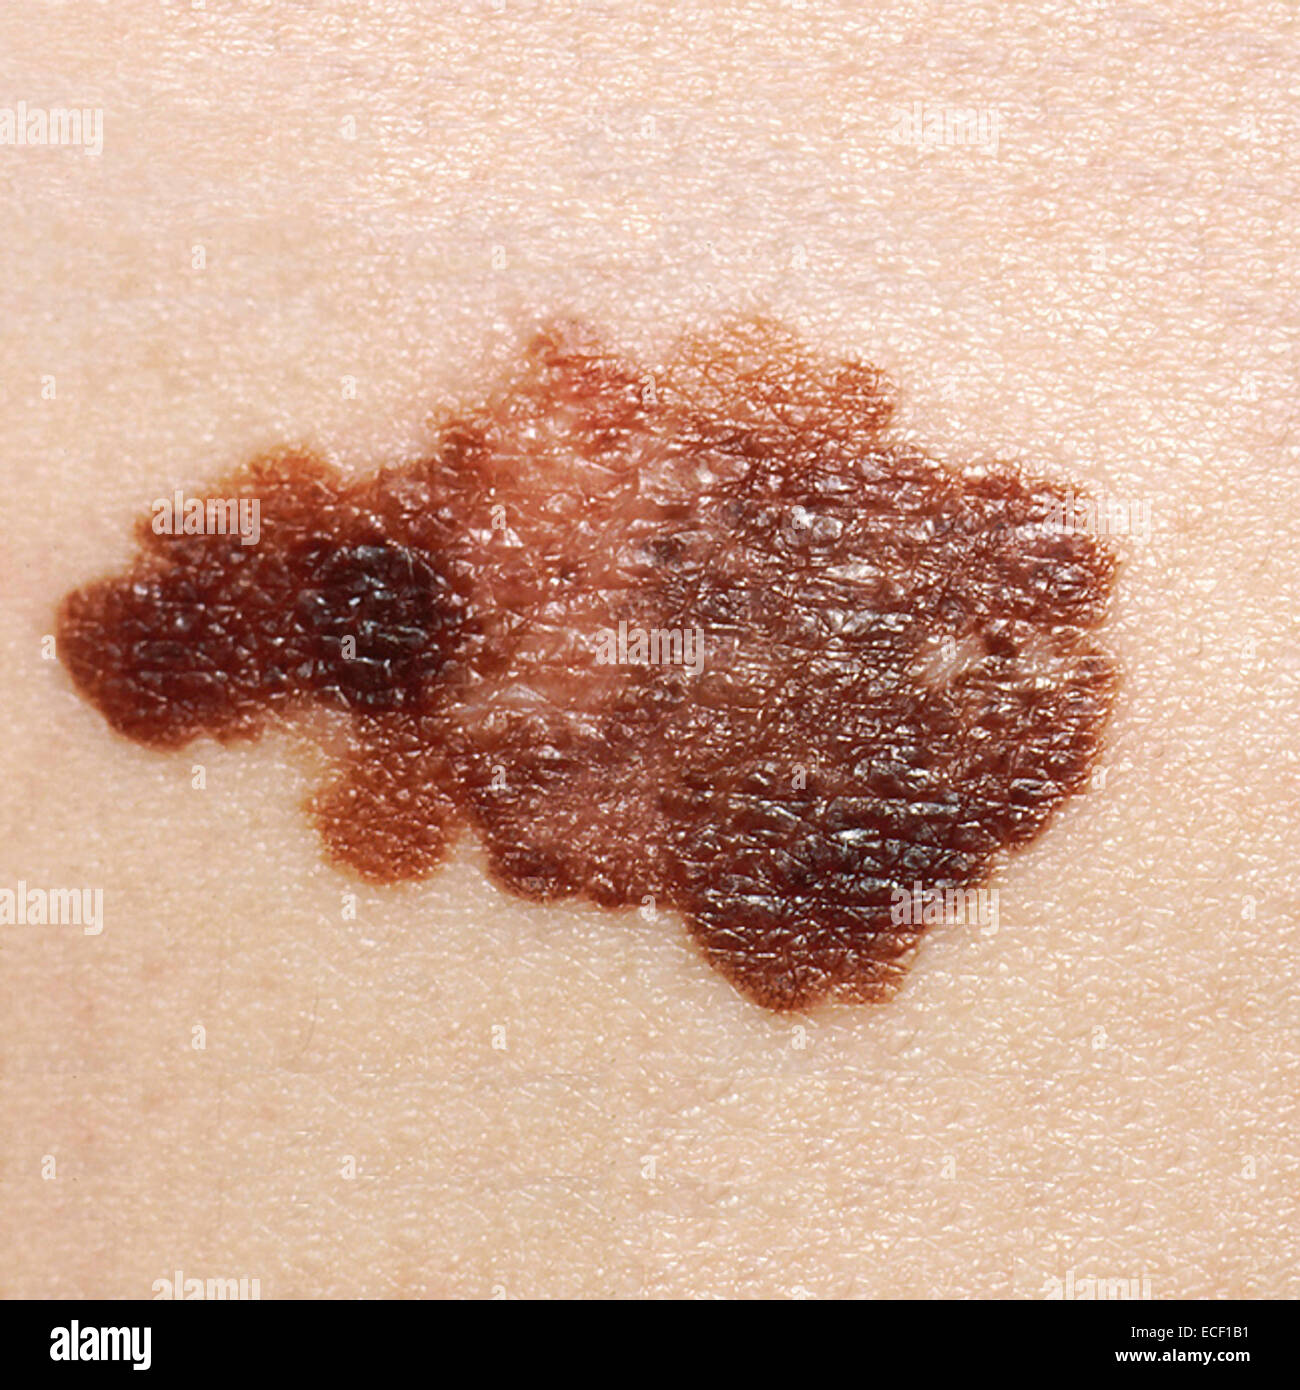 Melanoma on a patient's skin. Stock Photo